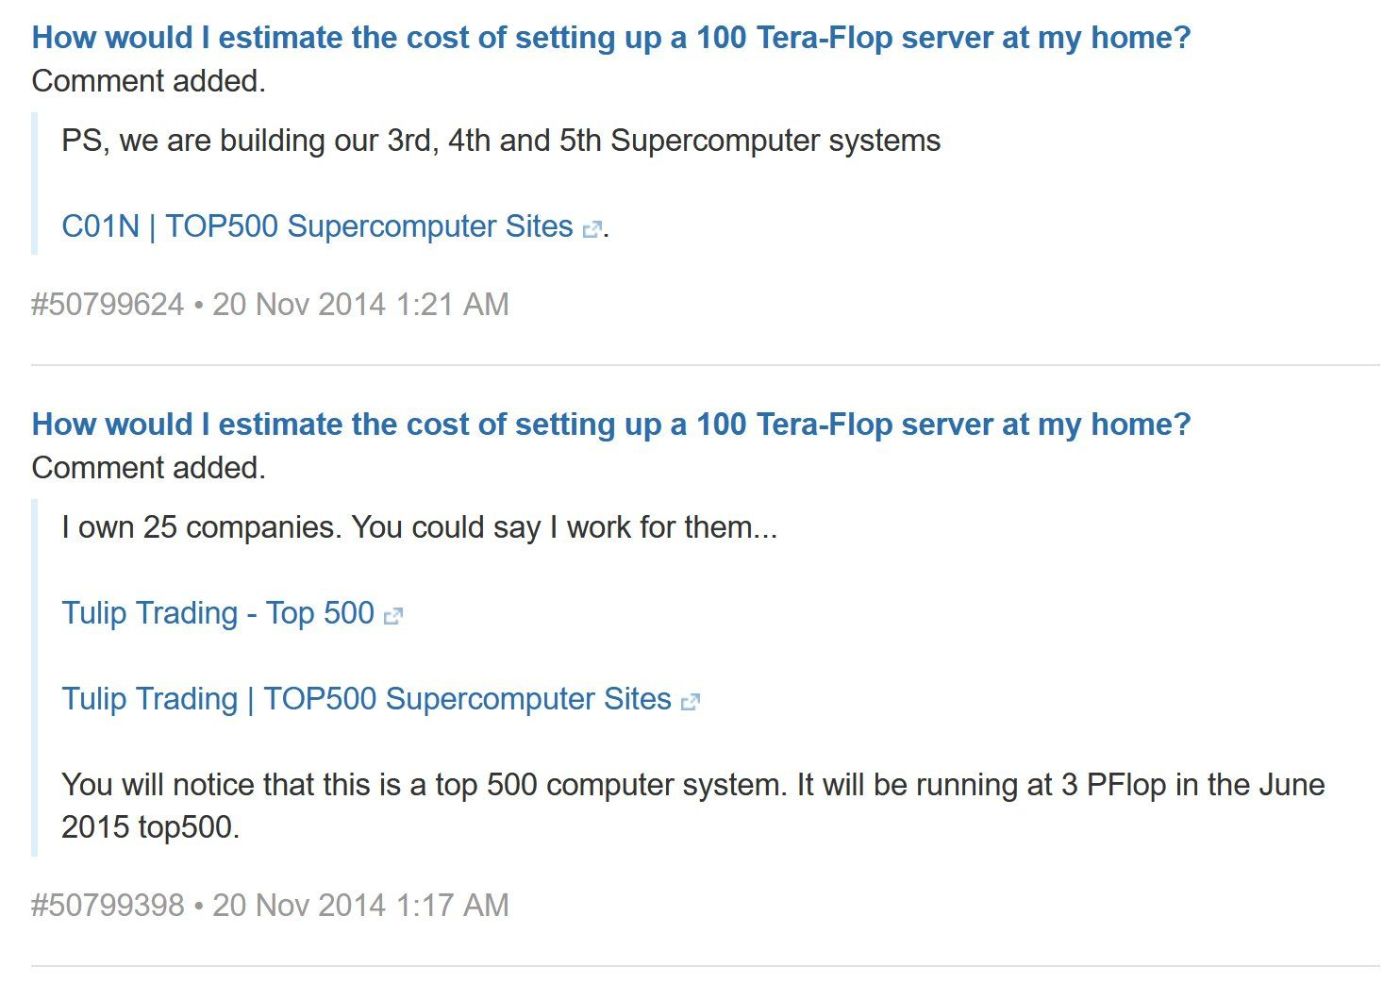 On Quora Craig Wright mentioned no less than 5 supercomputers on November 20, 2014.